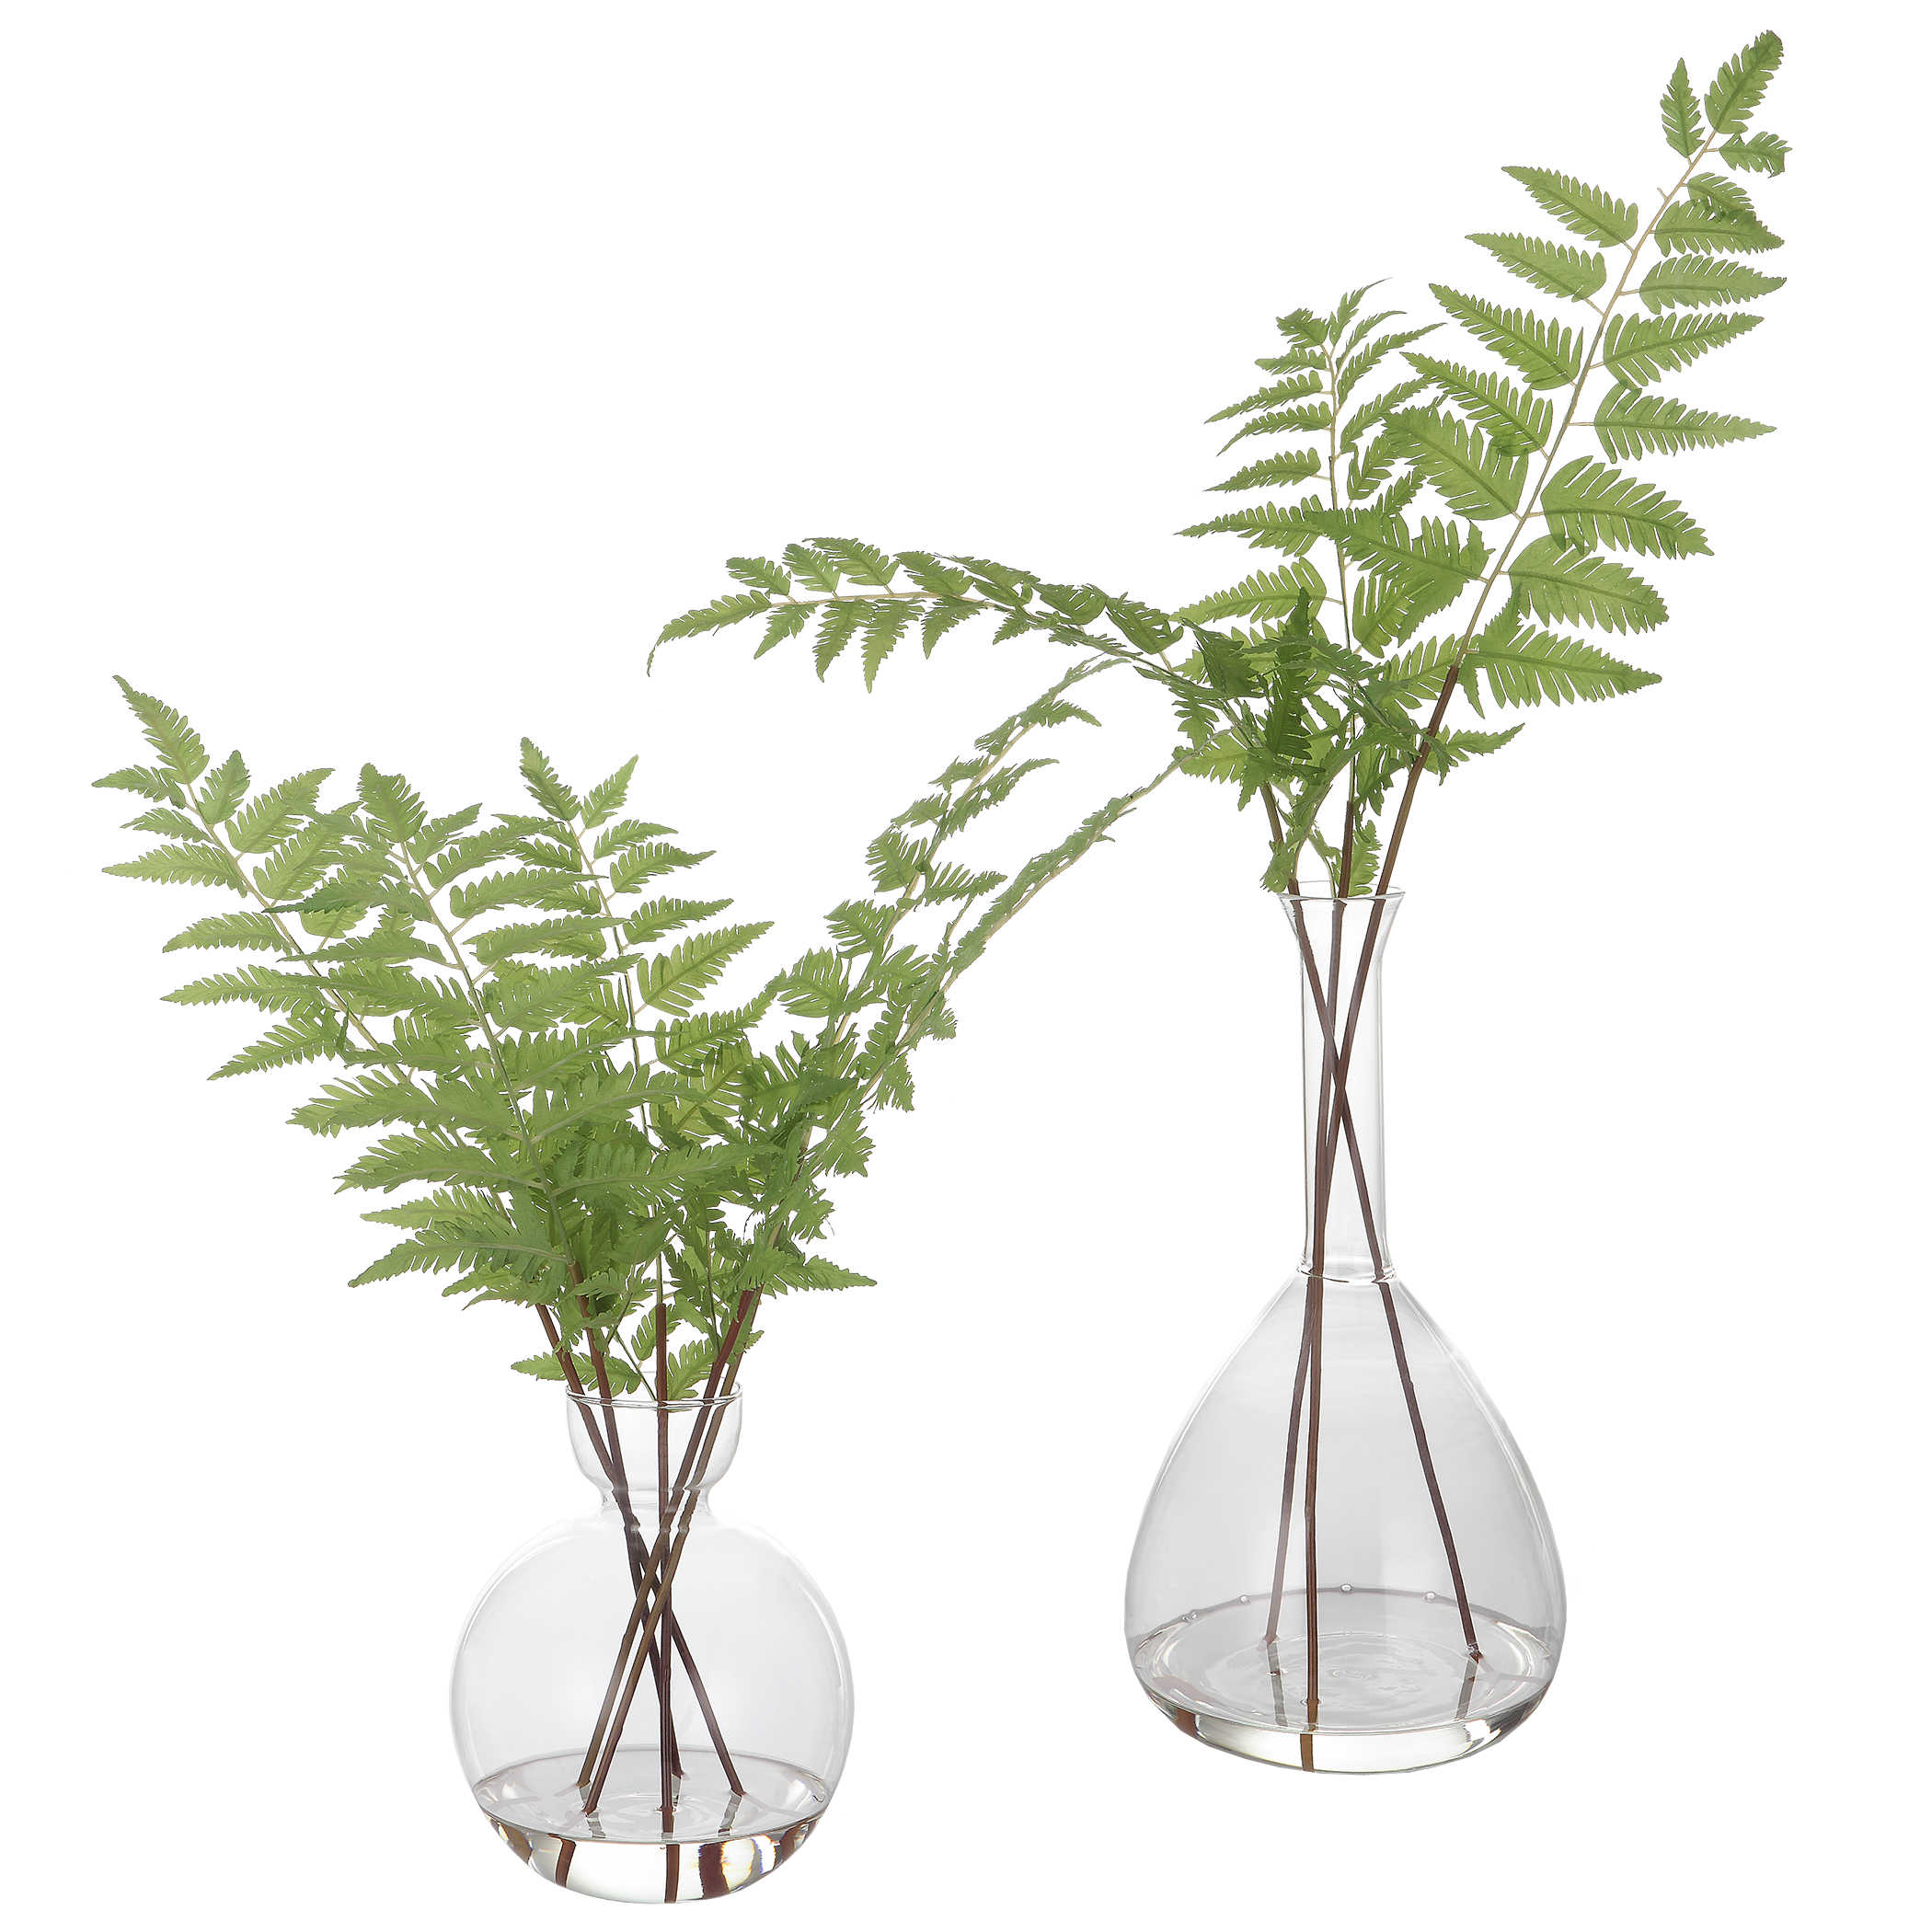 Uttermost Country Ferns, S/2 Décor/Home Accent Uttermost POLYESTER,PLASTIC,IRON,GLASS  